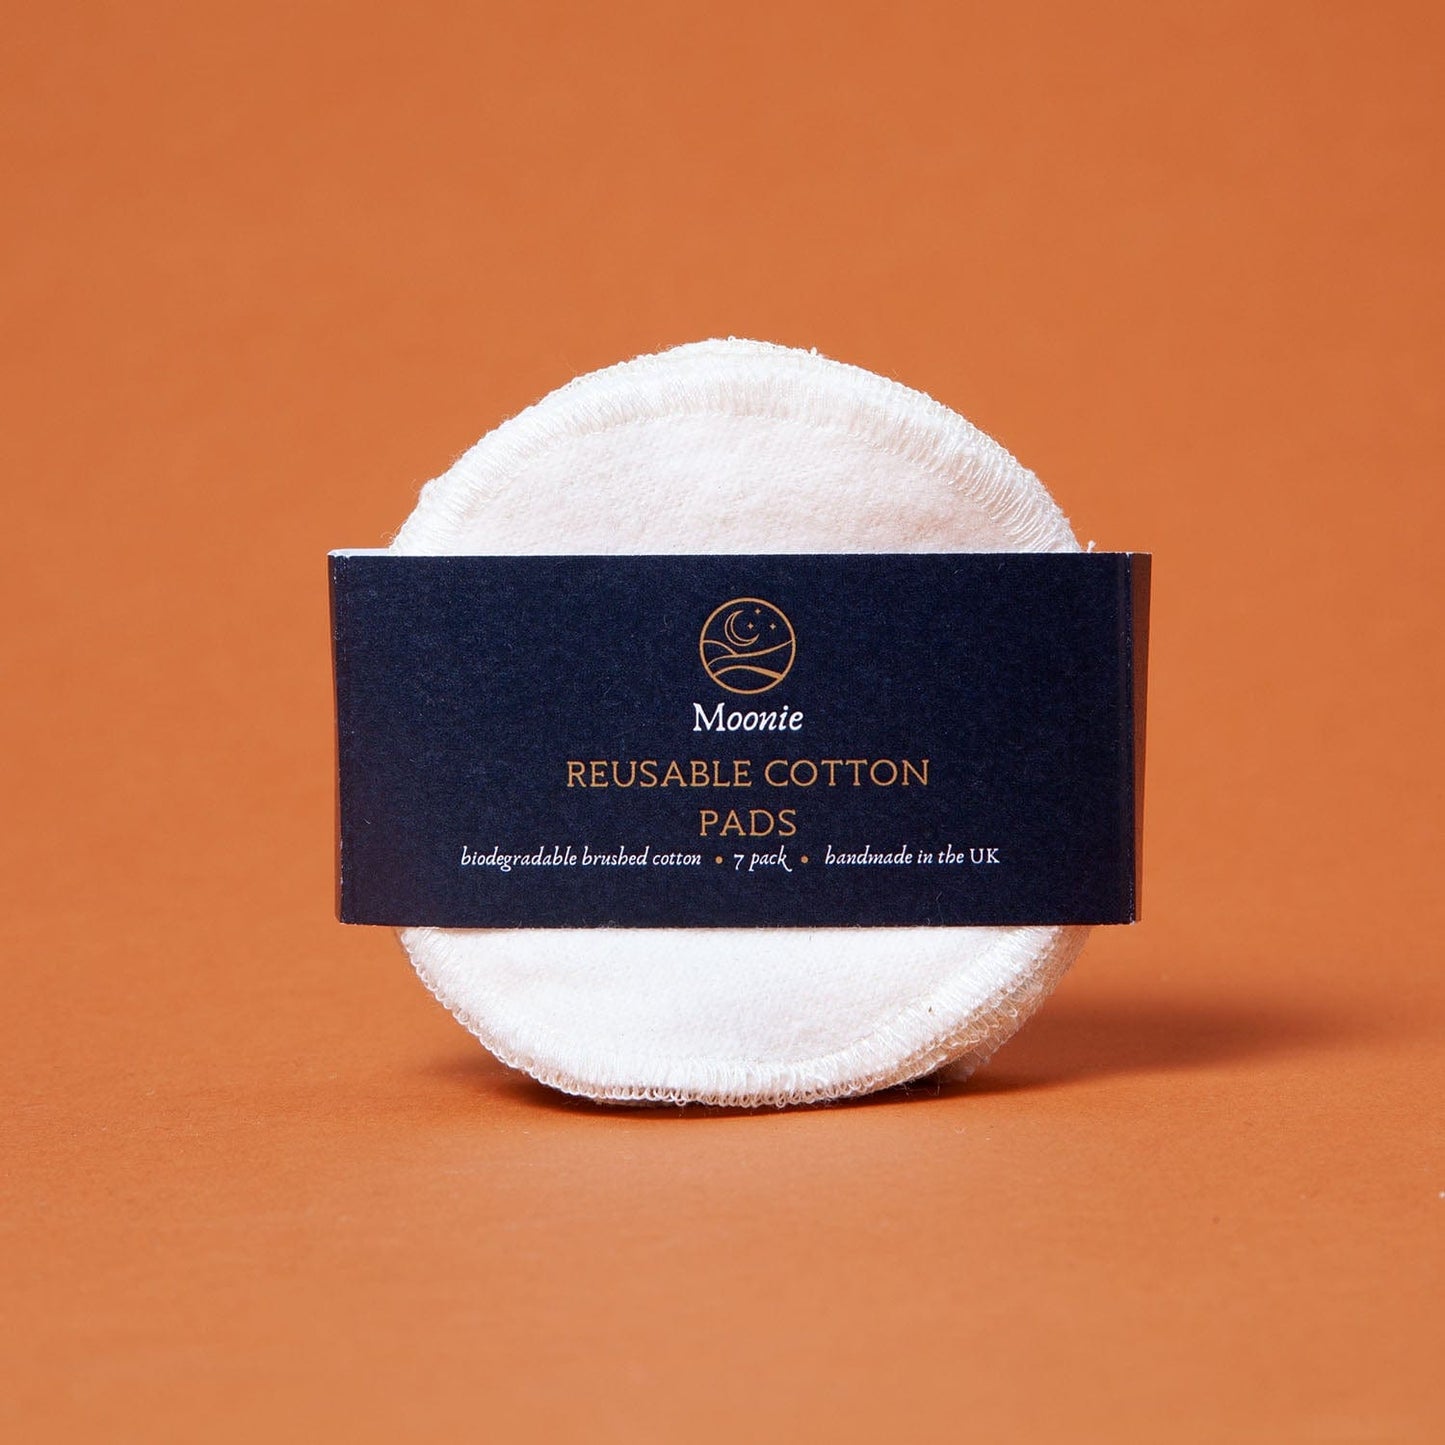 Reusable Cotton Pads - 7 PK - www.thecotswoldecocompany.co.uk